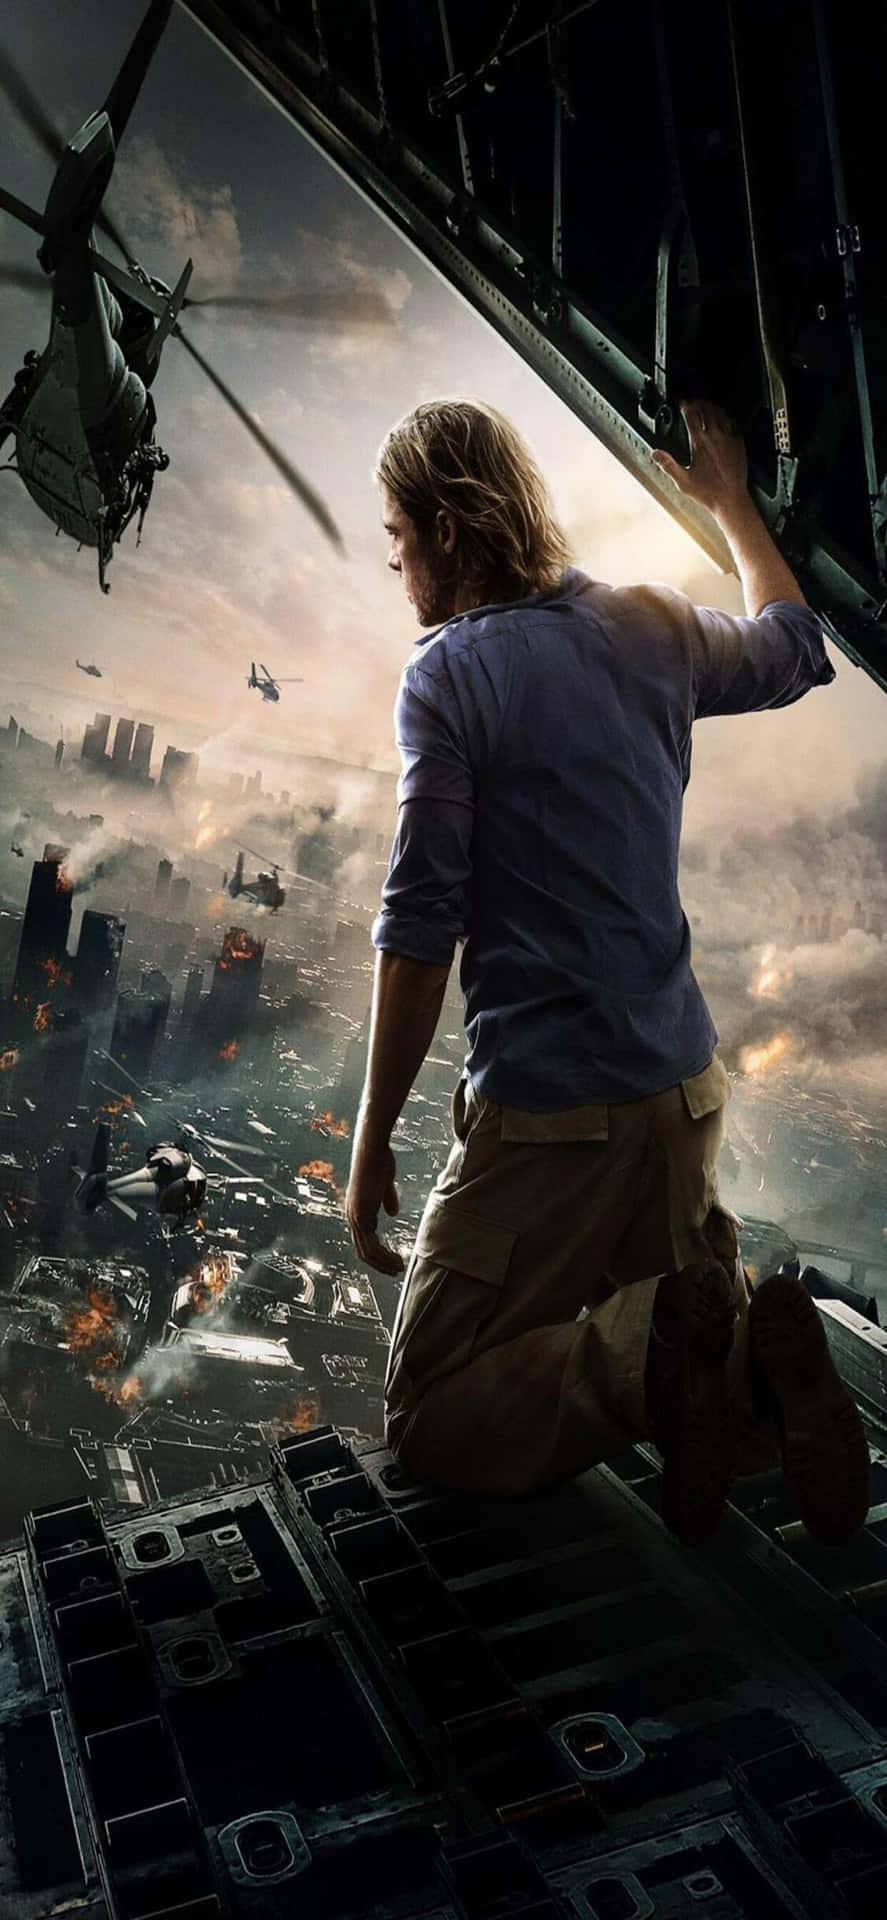 Download Gerry Lane iPhone XS Max World War Z Background | Wallpapers.com